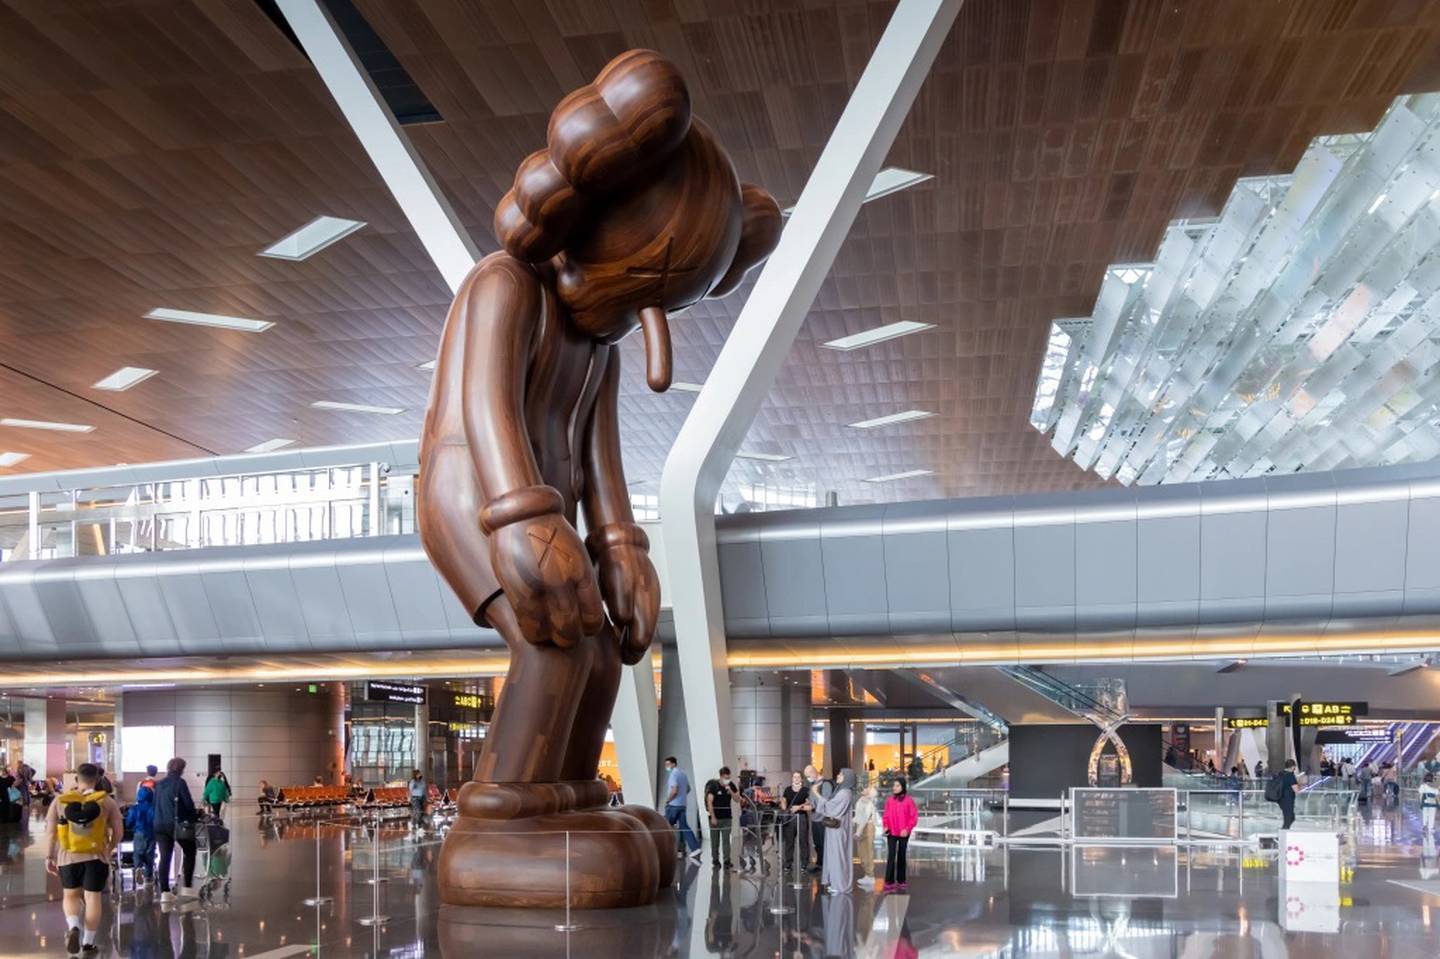 Kaws has already installed some jobs in the country, including 